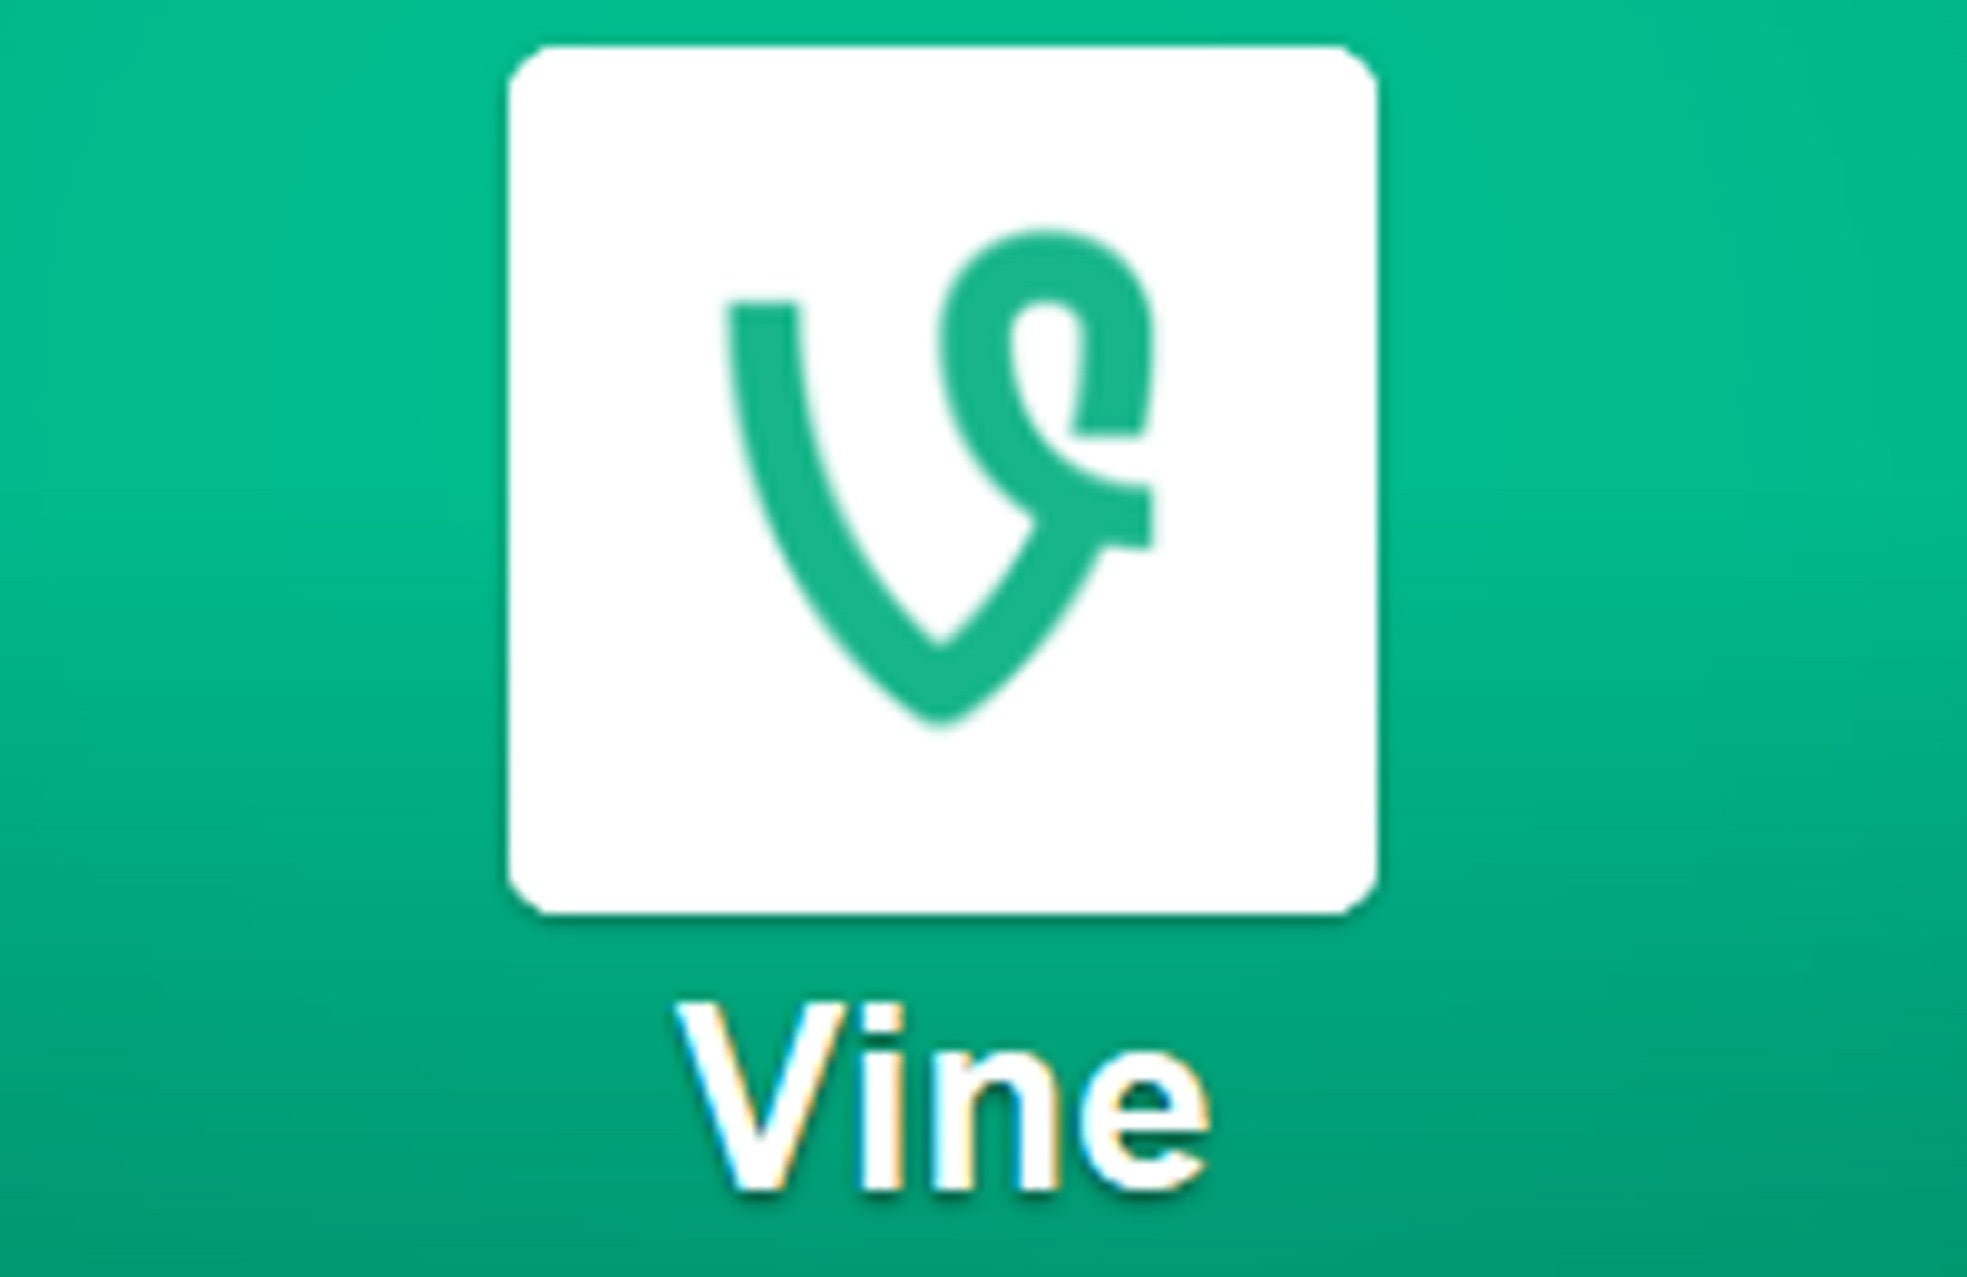 Twitter users can now share looped video clips of six seconds' length using the comapny's standalone iPhone app, Vine